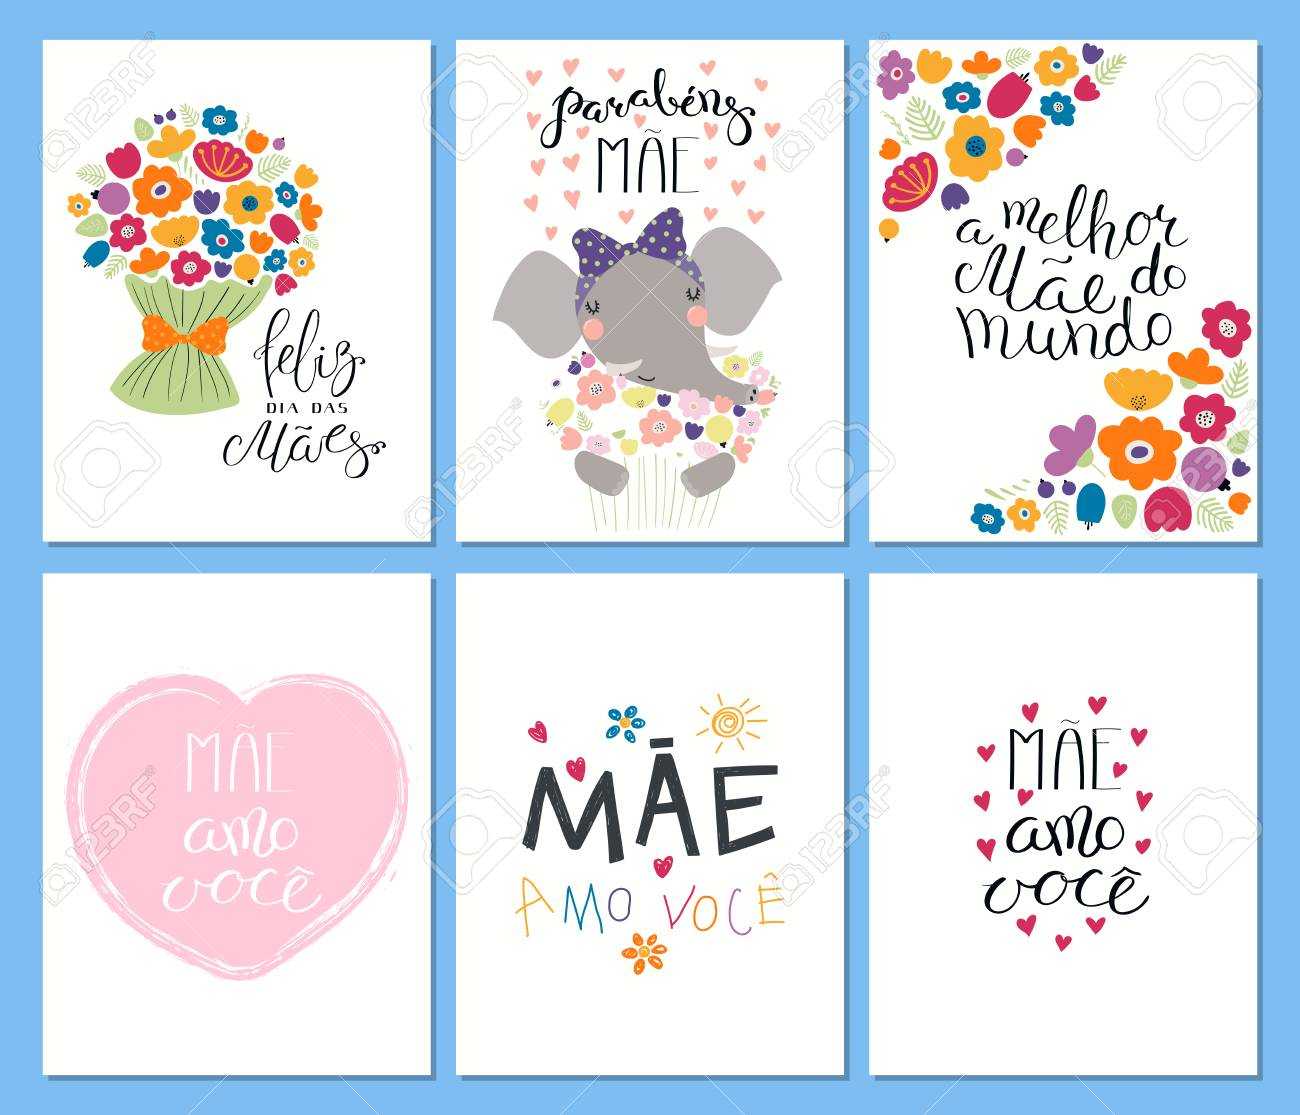 Set Of Mother's Day Cards Templates With Quotes In Portuguese Throughout Mothers Day Card Templates